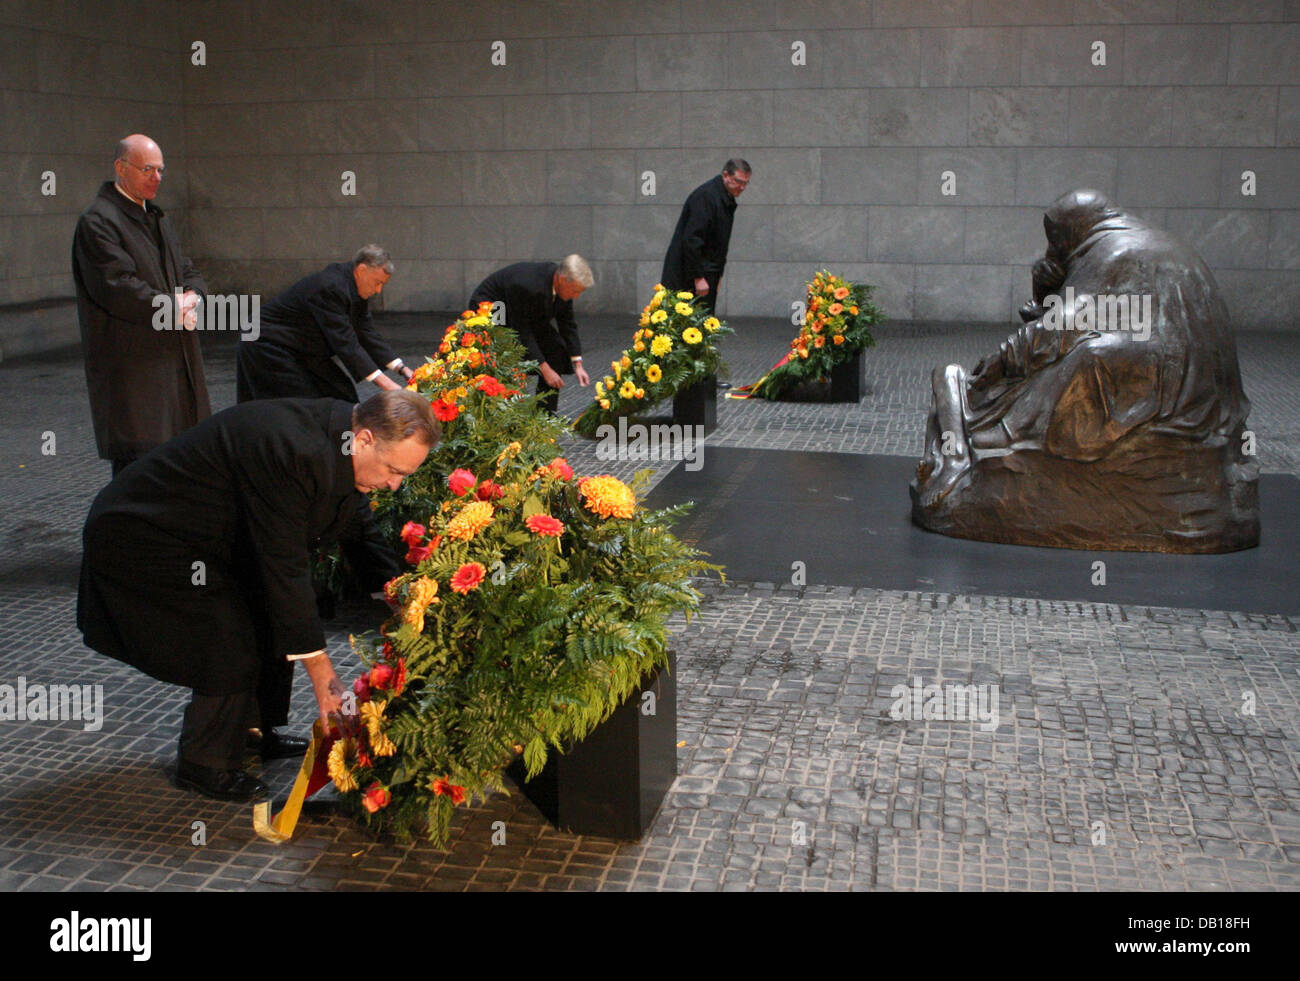 President of the Constitutional Court of Germany, Hans-Juergen Papier, President of the Bundestag, Norbert Lammert, German President Horst Koehler, President of the Federal Council, Ole von Beust, and Minister of Defence, Franz-Josef Jung (L-R) lay down wreath in front of Kaethe Kollwitz's sculpture 'Mother with her Dead Son' at the New Watchhouse (Neue Wache) on 'Volkstrauertag' i Stock Photo